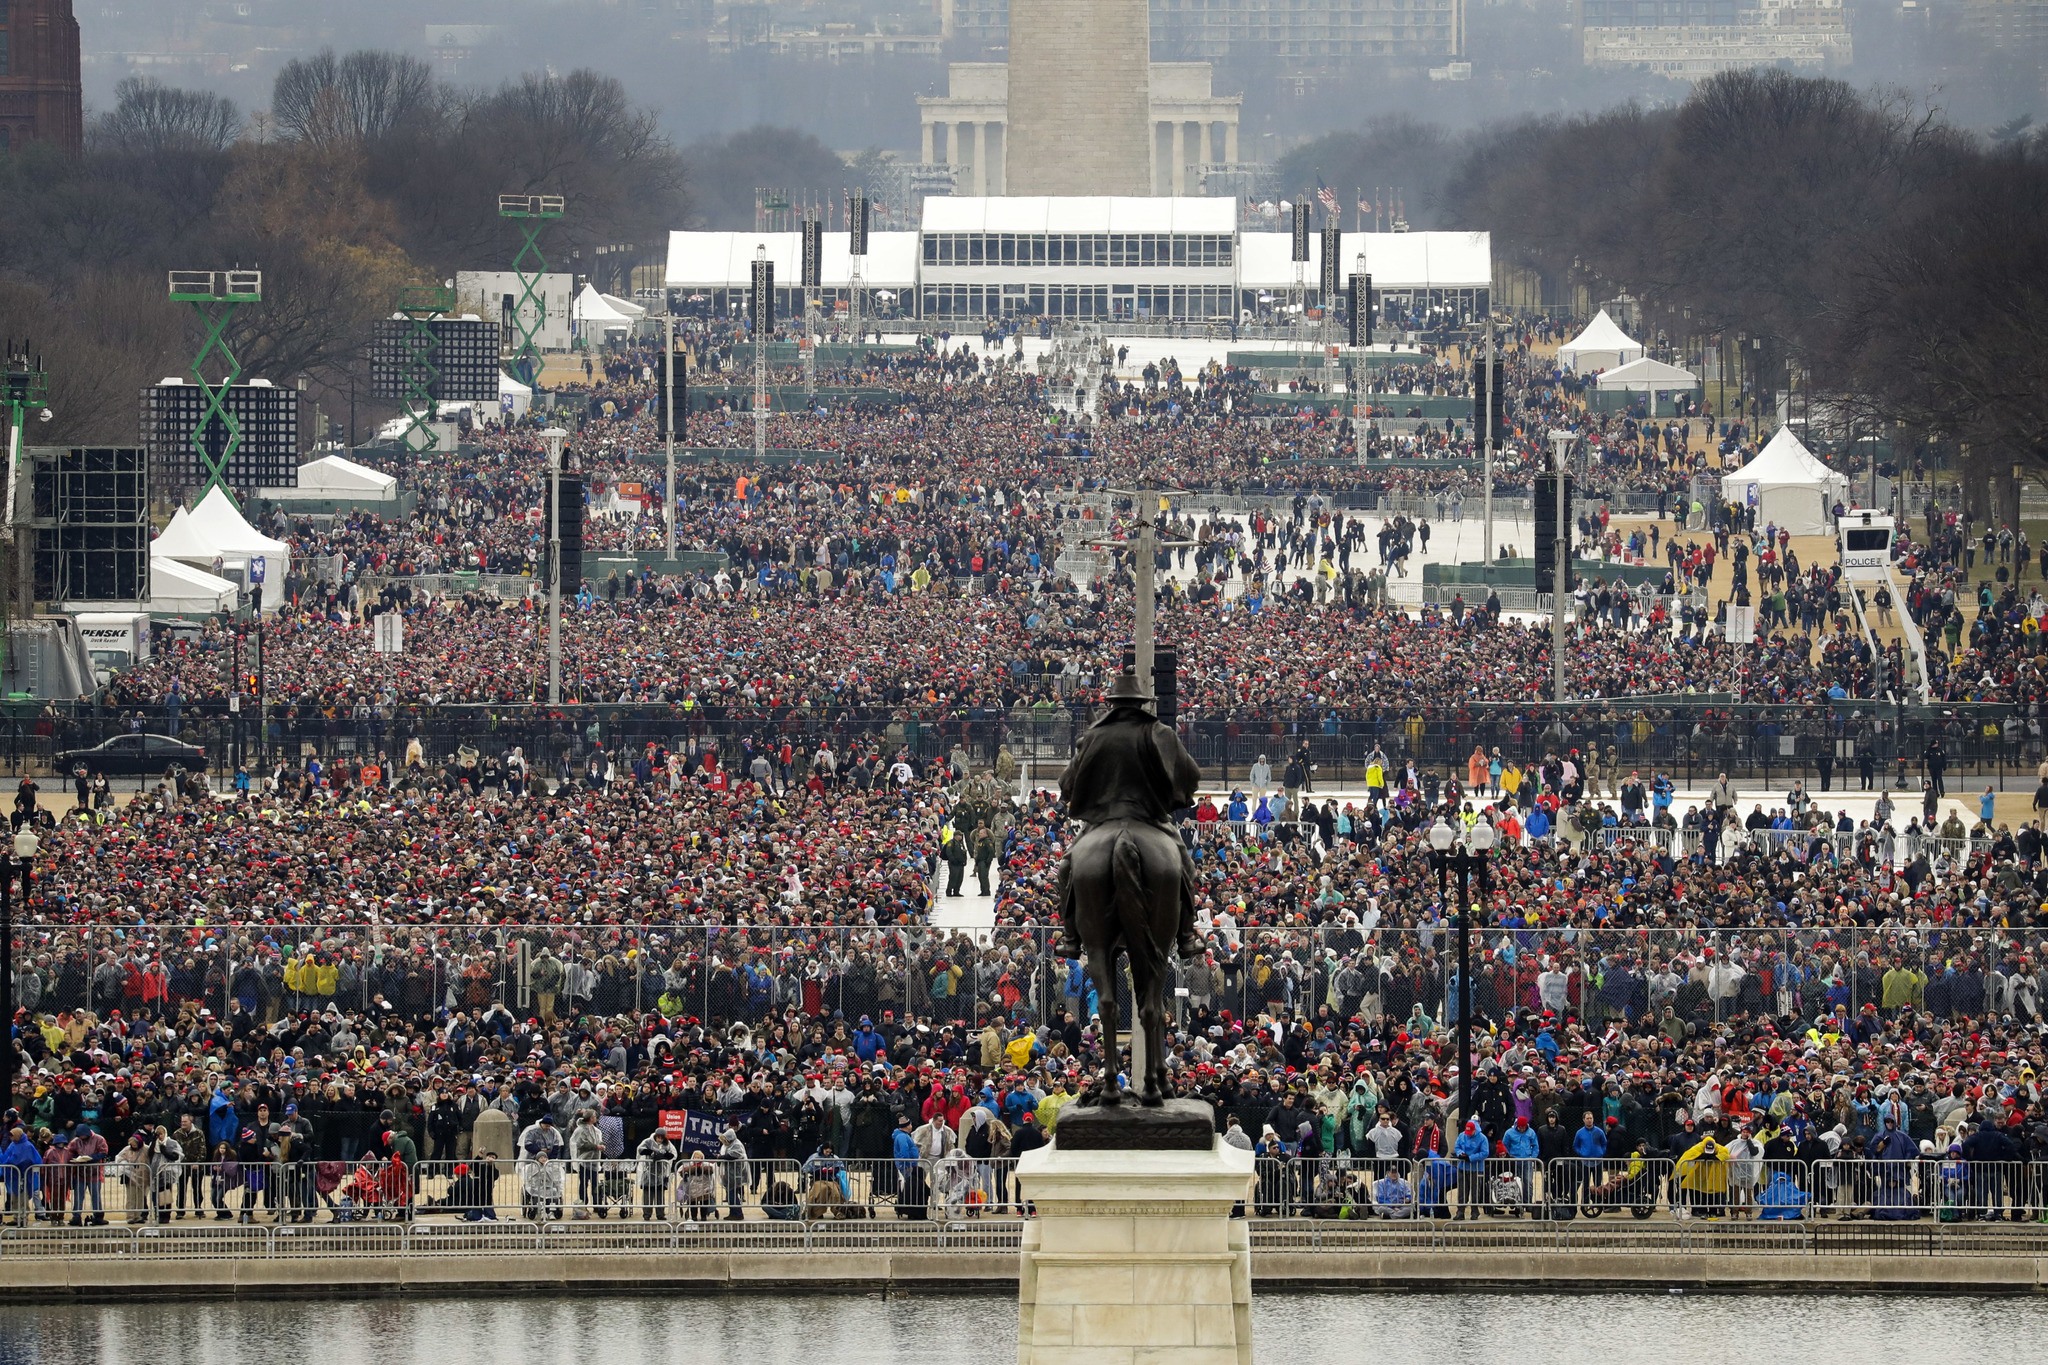 People stand on the National Mall to listen to the 58th Presidential Inauguration for President Donald Trump at the U.S. Capitol in Washington, D.C. (The Associated Press)